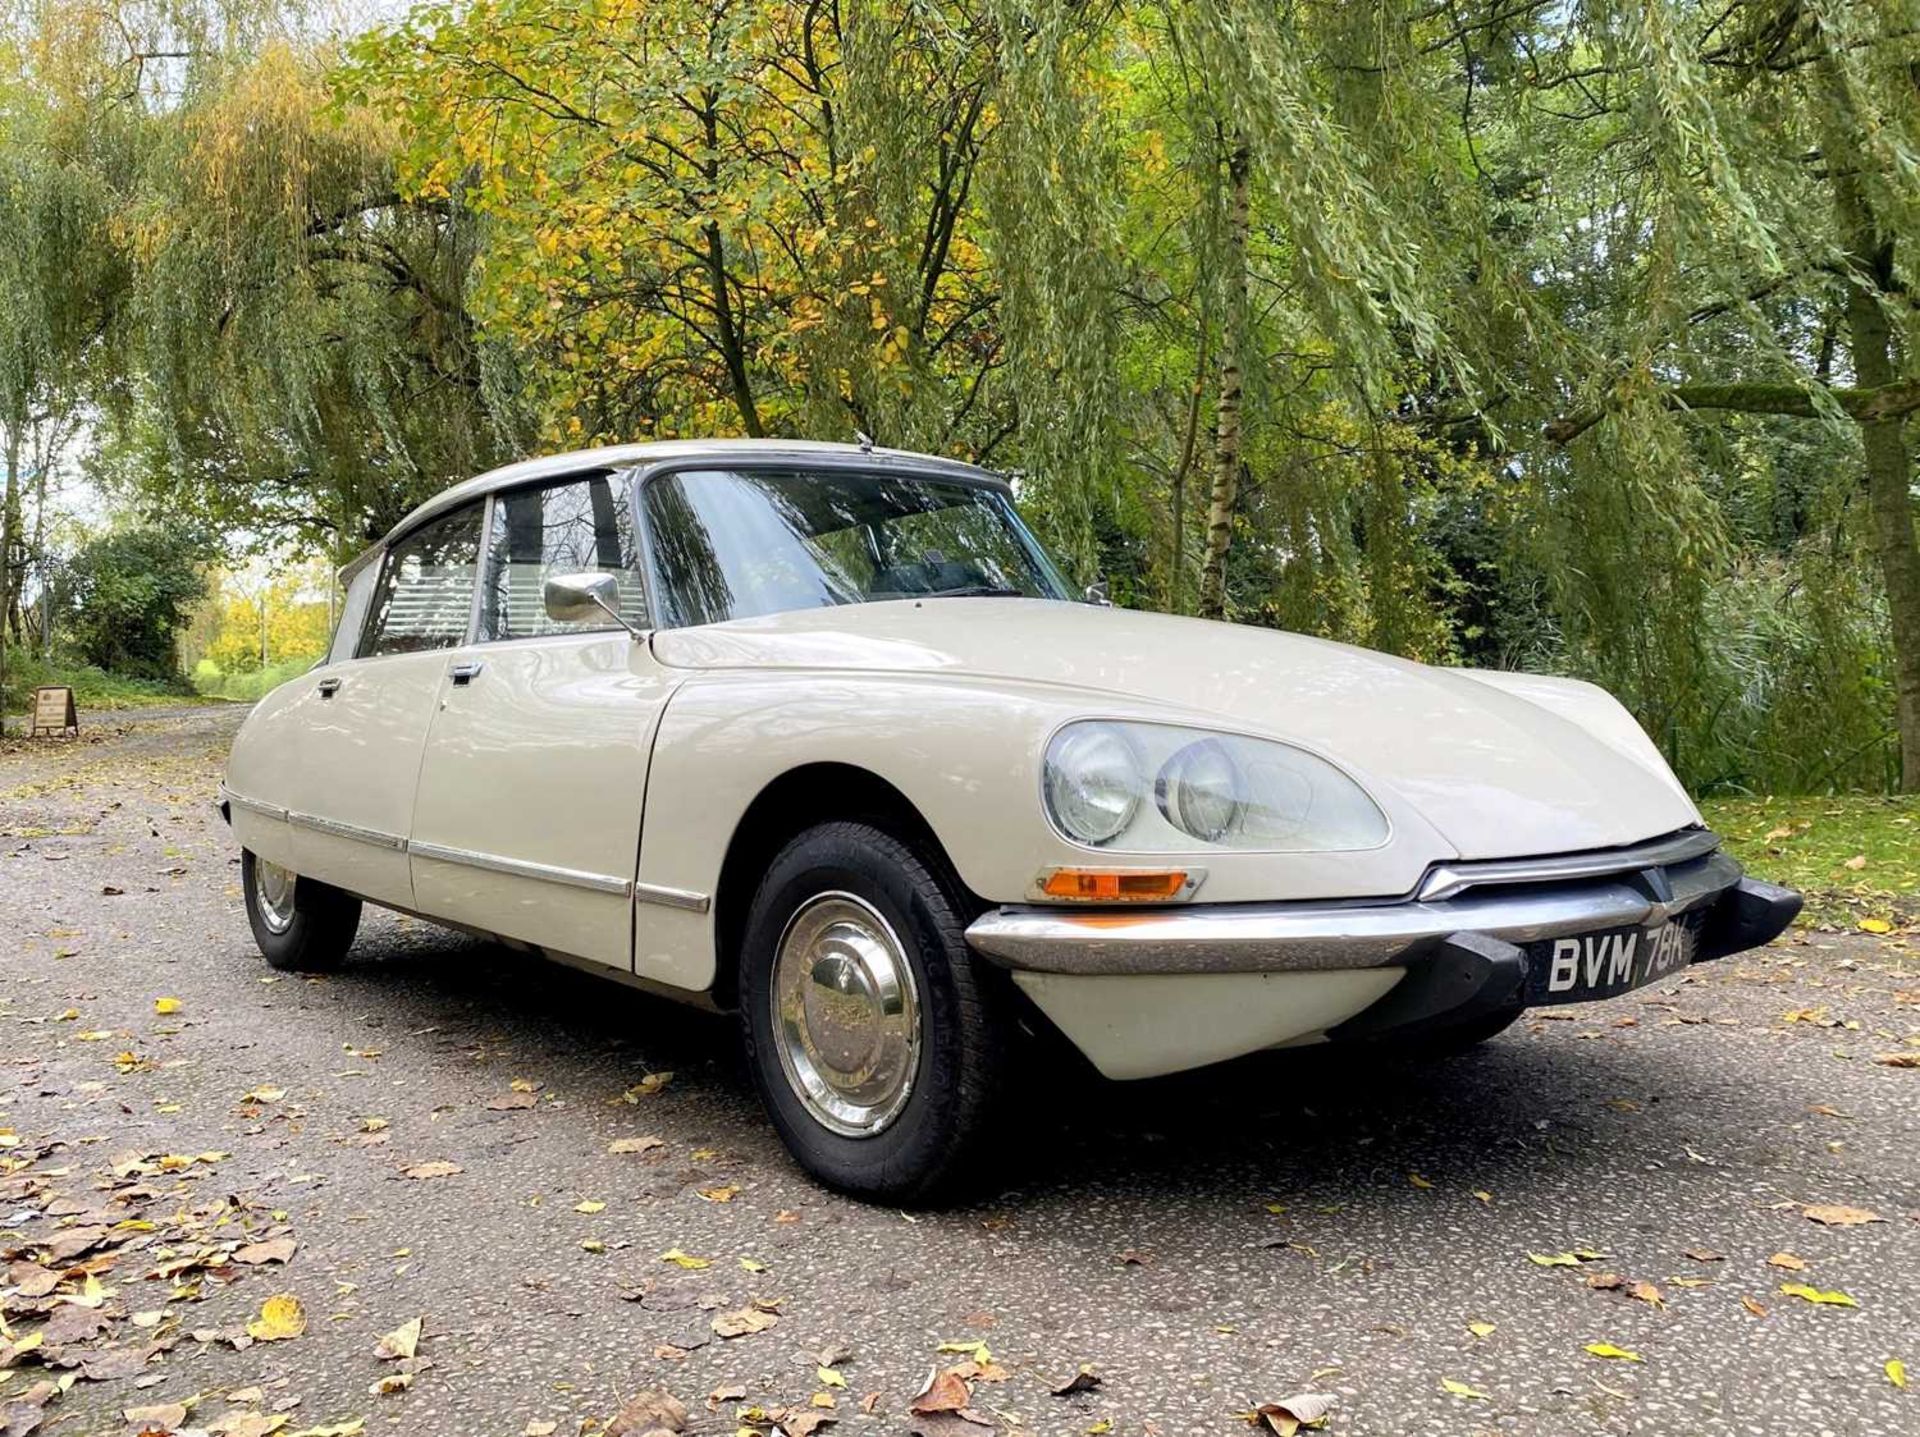 1971 Citroën DS21 Recently completed a 2,000 mile European grand tour